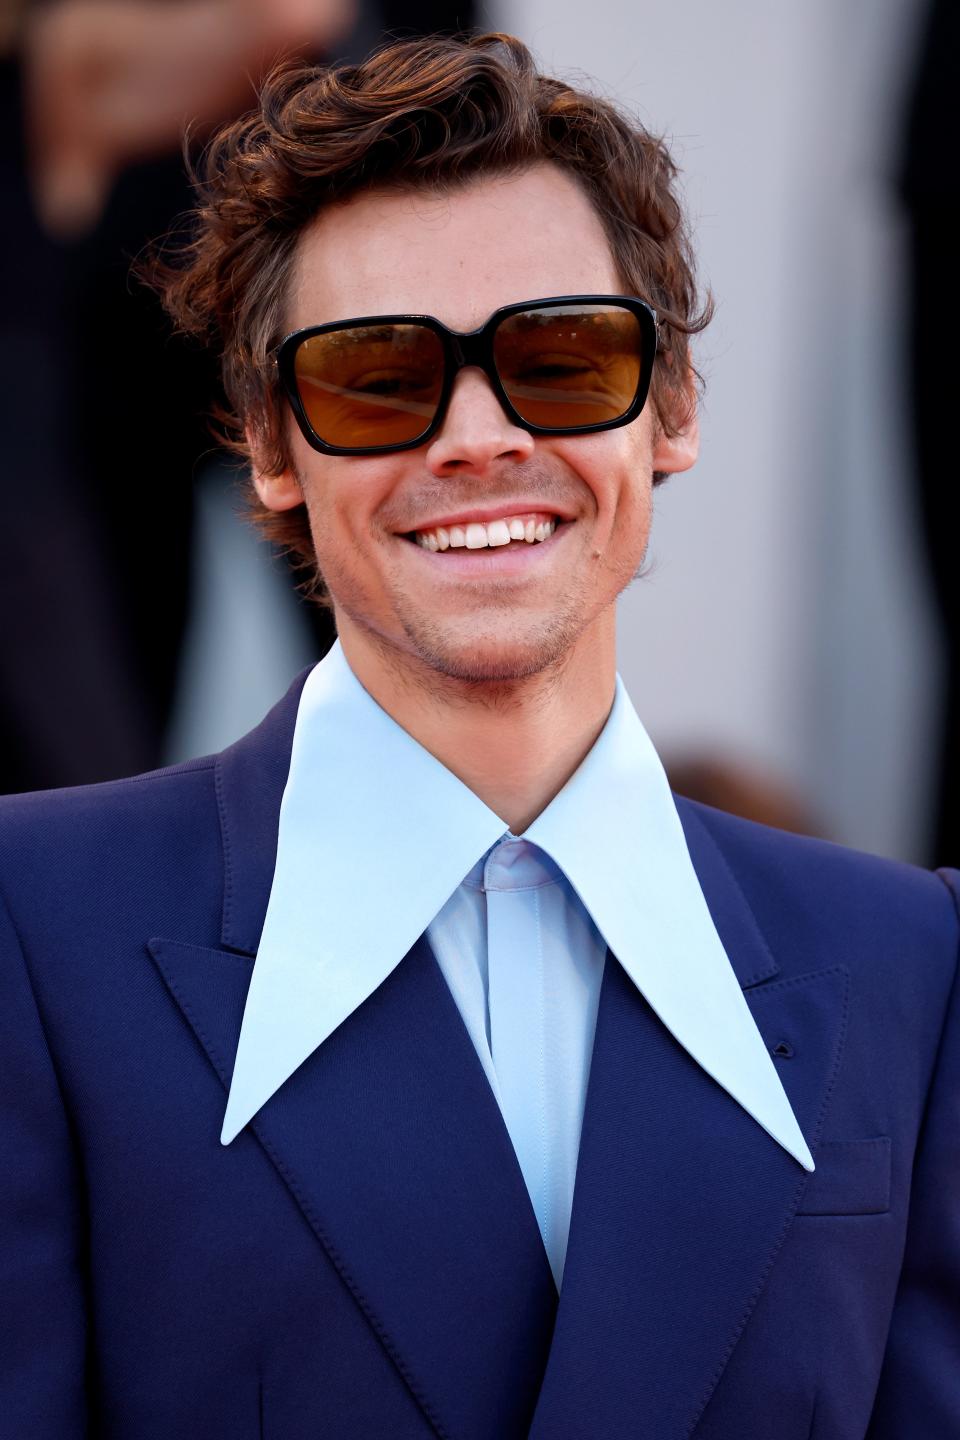 September 5, 2022: Harry Styles attends the "Don't Worry Darling" red carpet at the 79th Venice International Film Festival in Venice, Italy. 